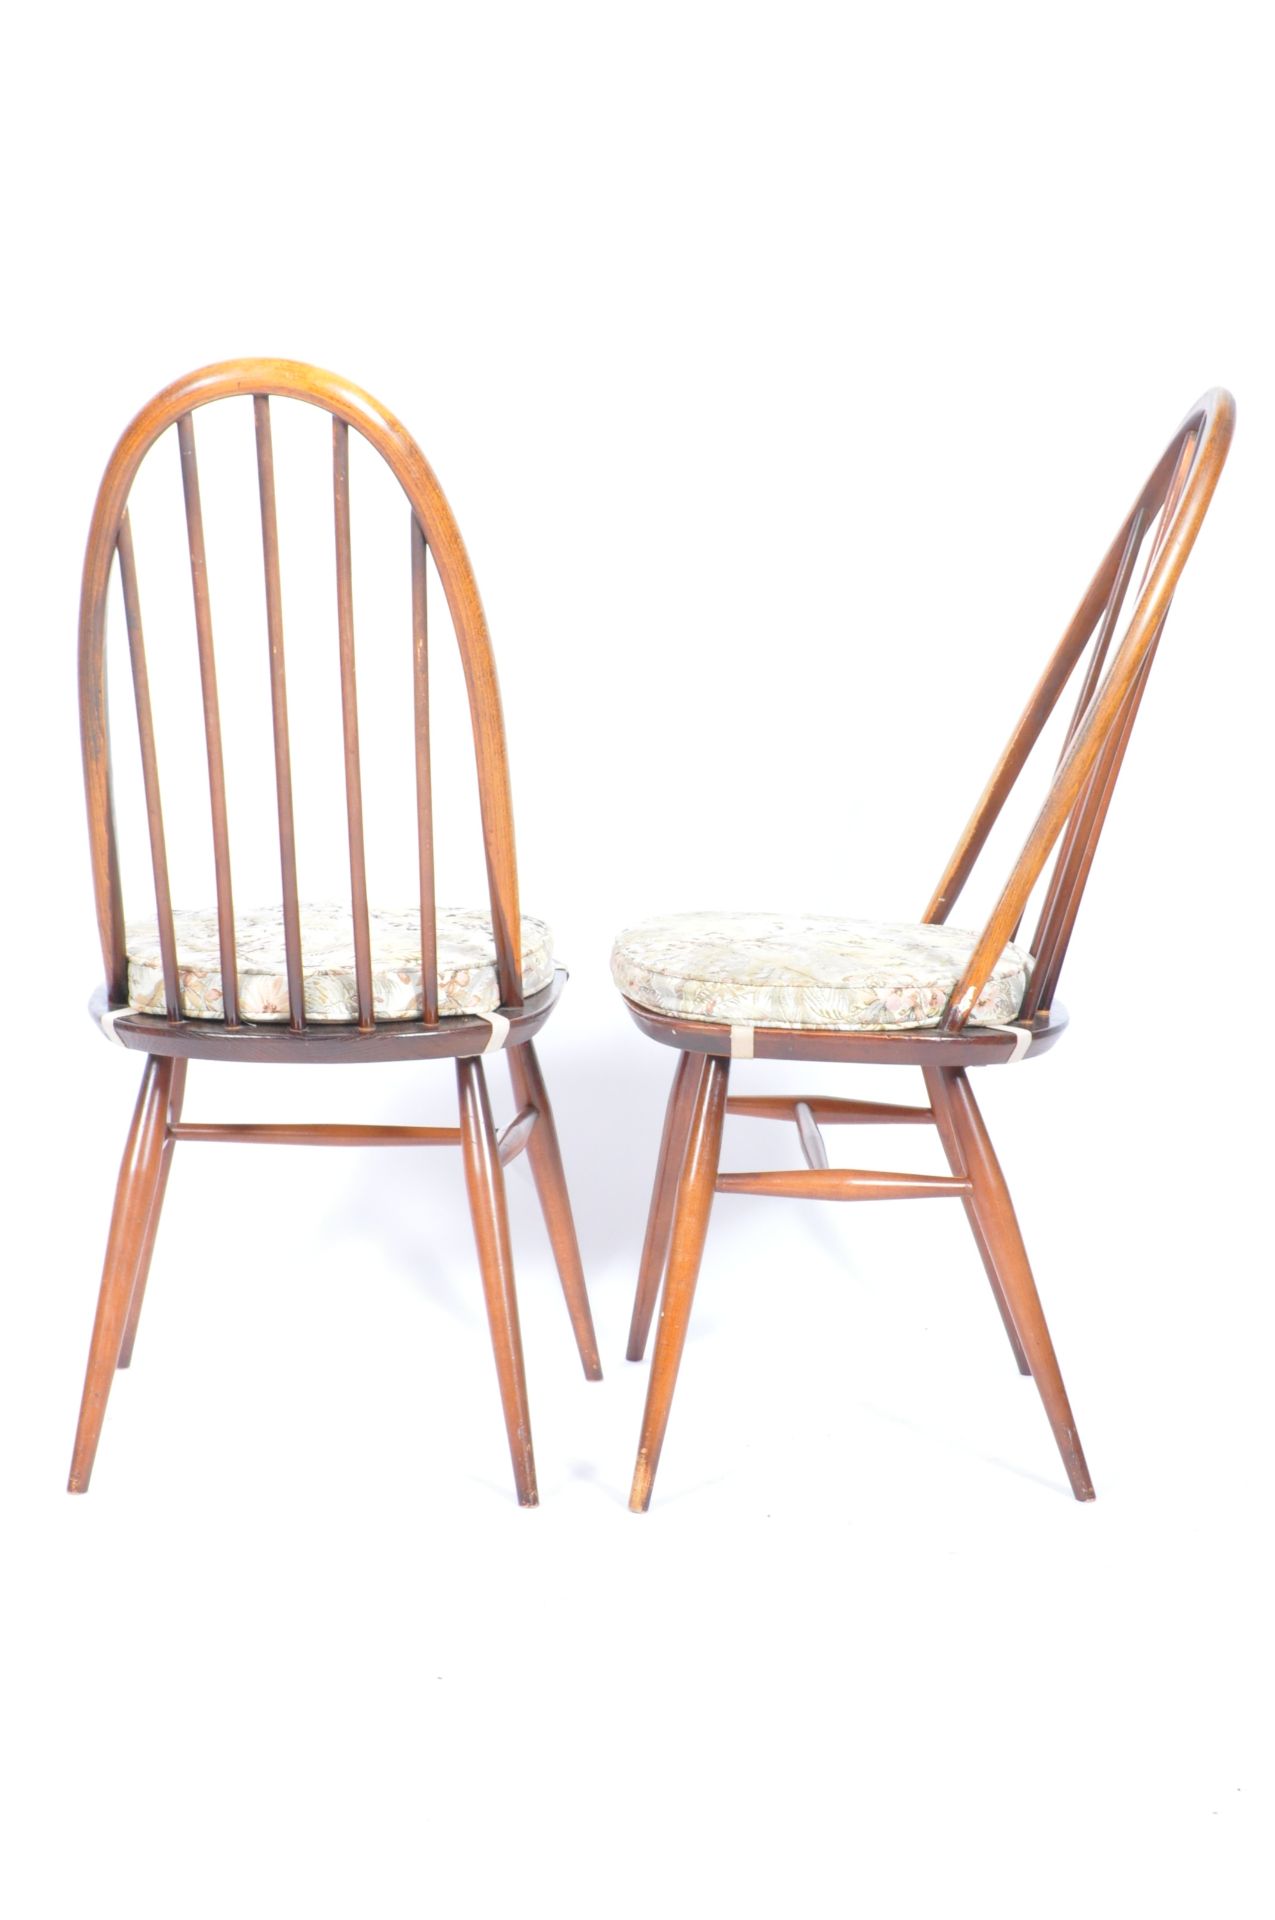 ERCOL QUAKER WINDSOR PATTERN SET OF FOUR DINING CHAIRS - Image 7 of 8